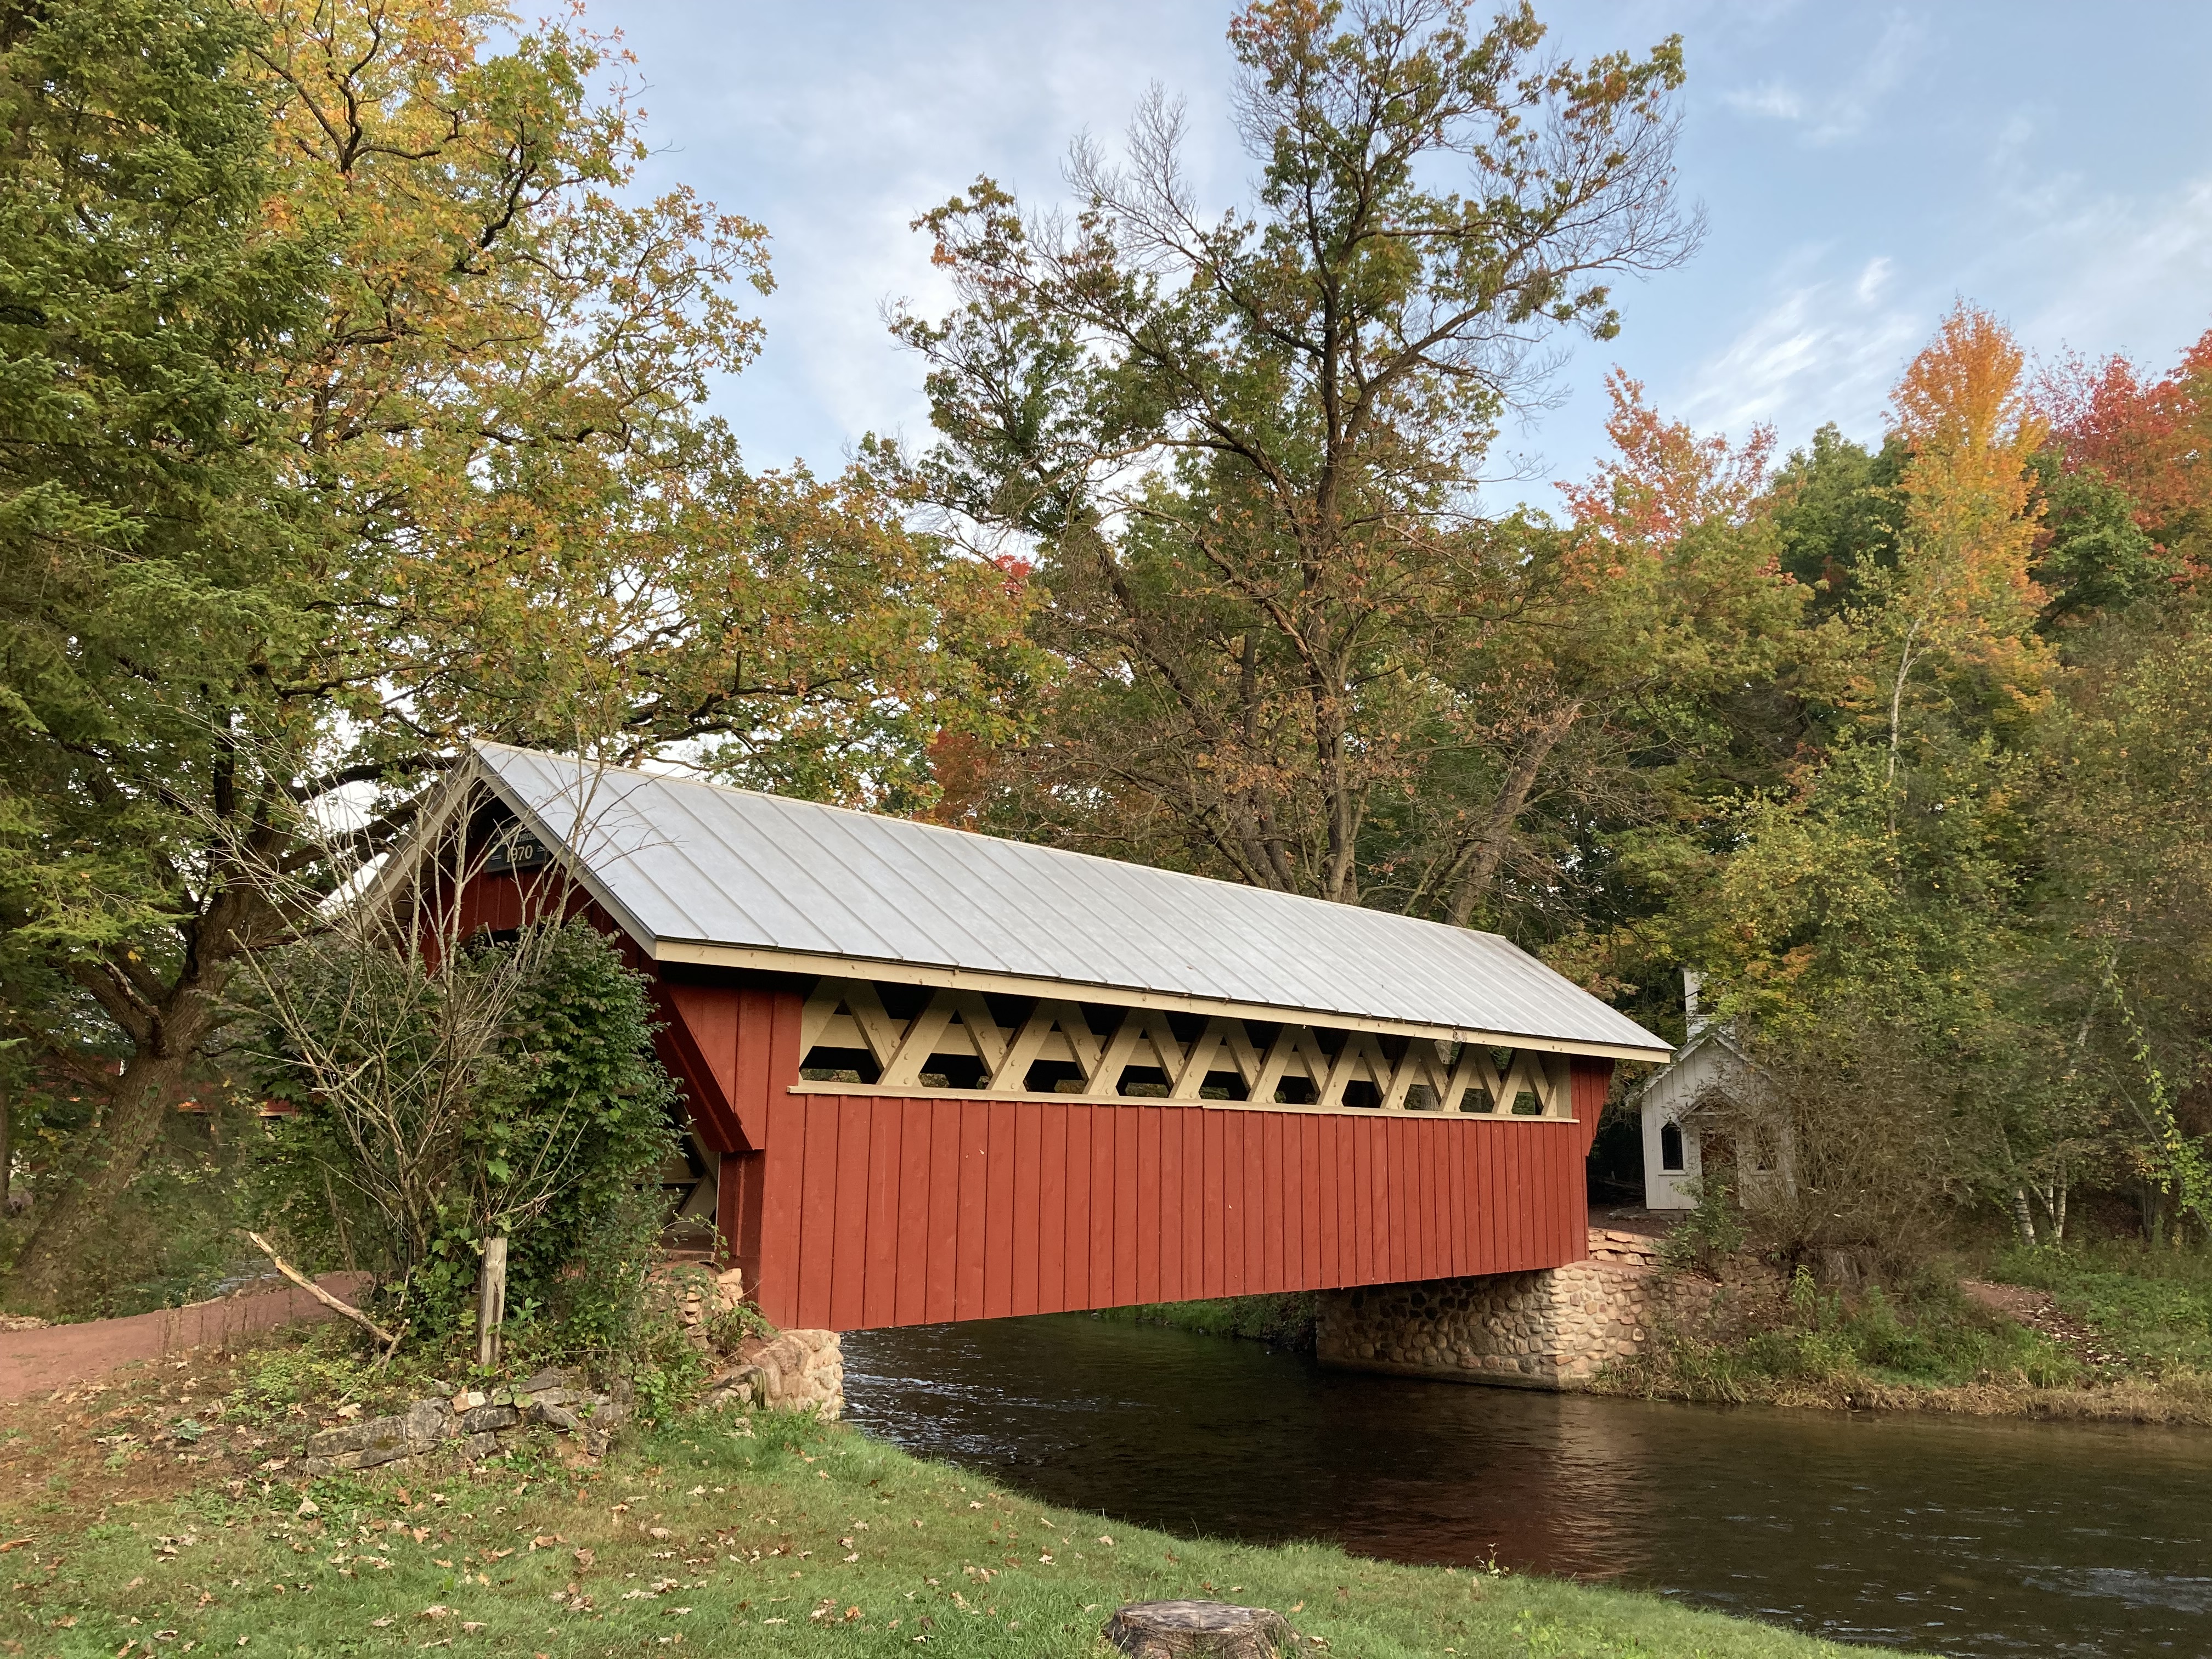 The Covered Bridge at the Red-mill